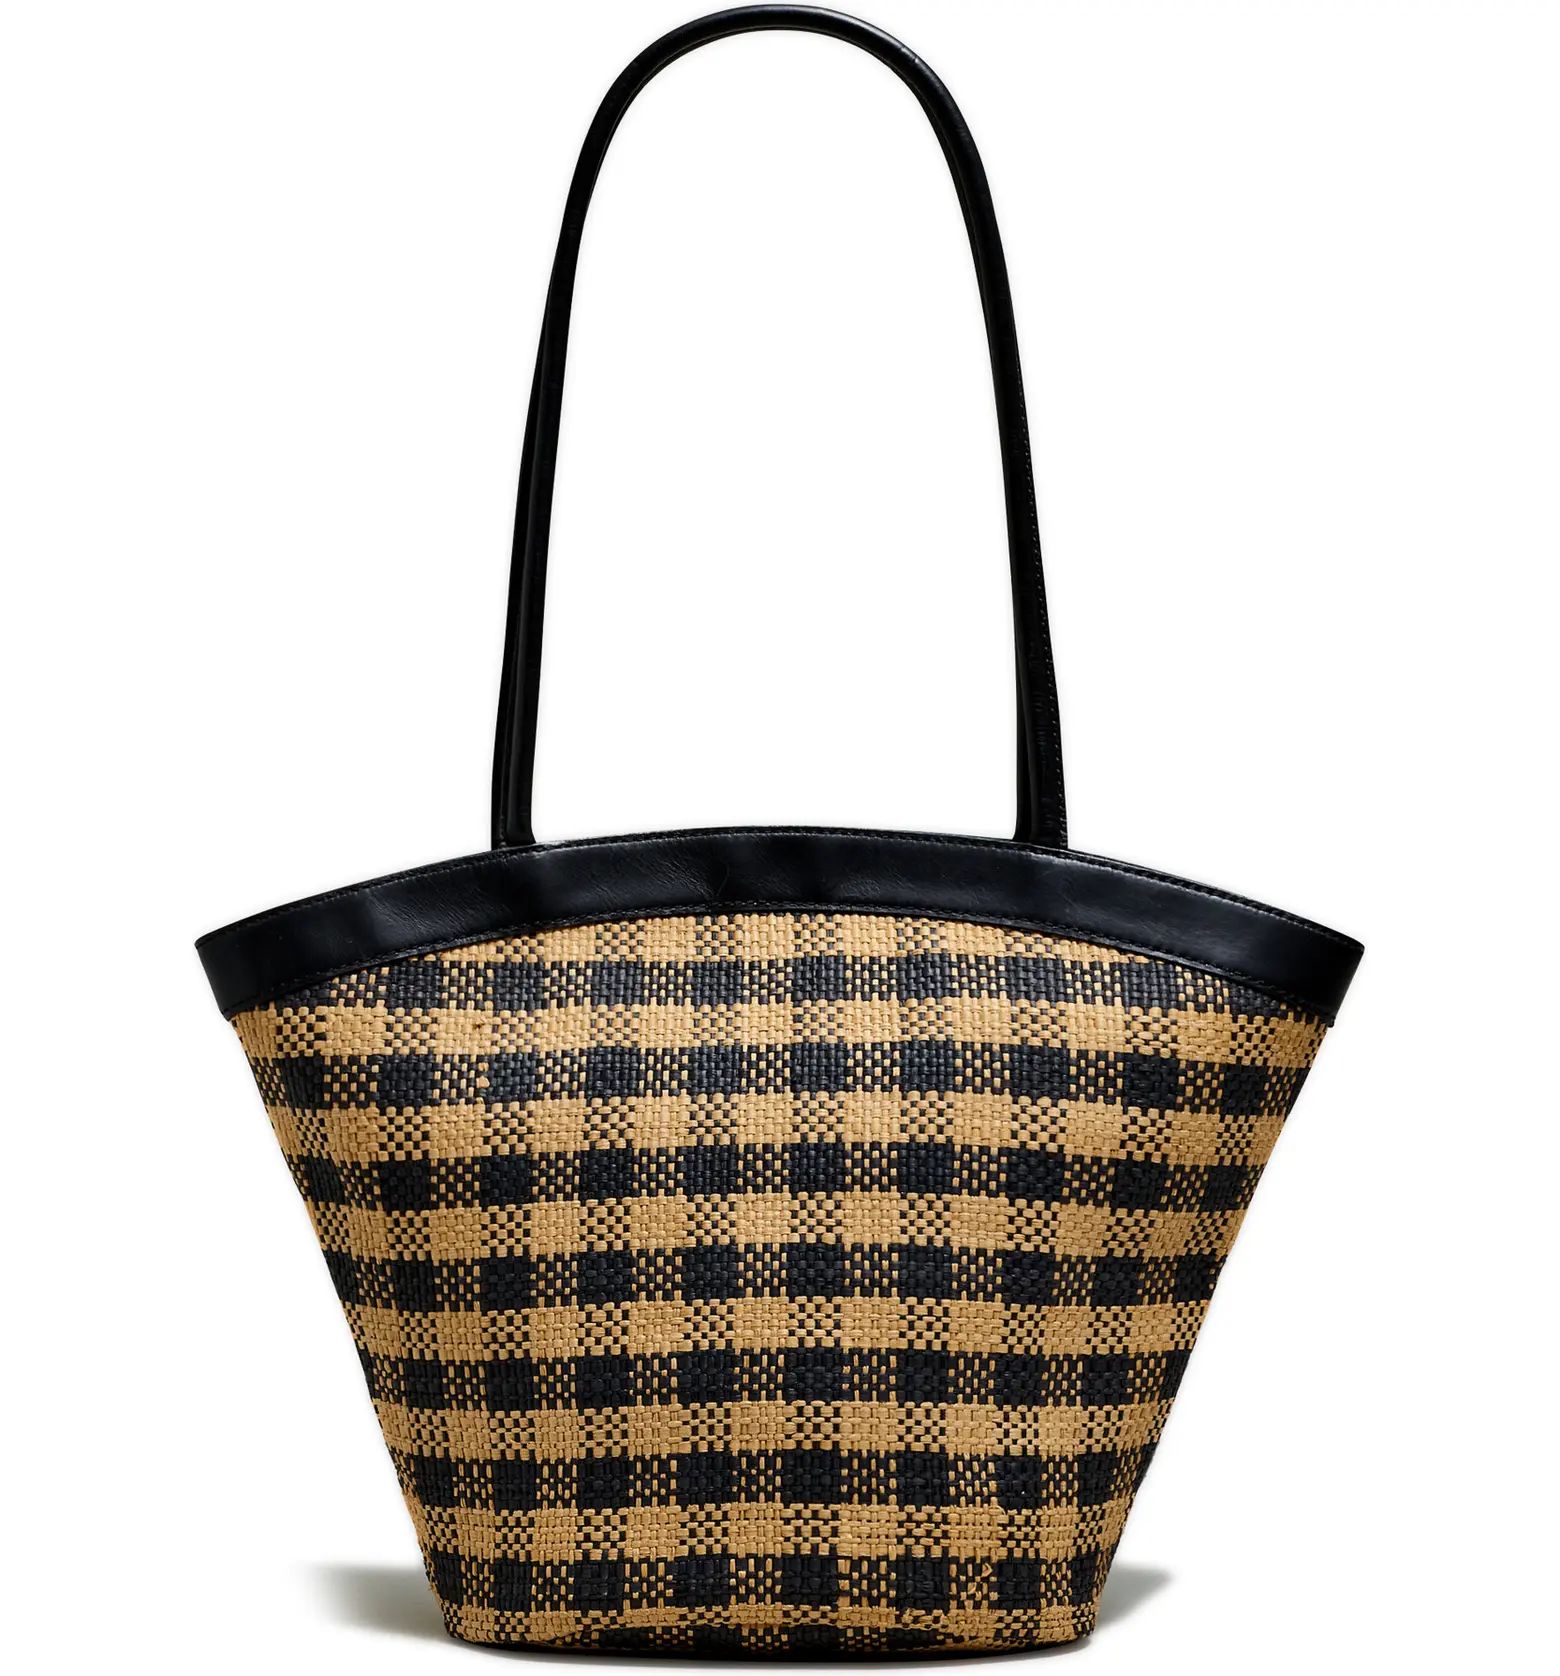 Market Check Woven Straw Basket Tote | Nordstrom